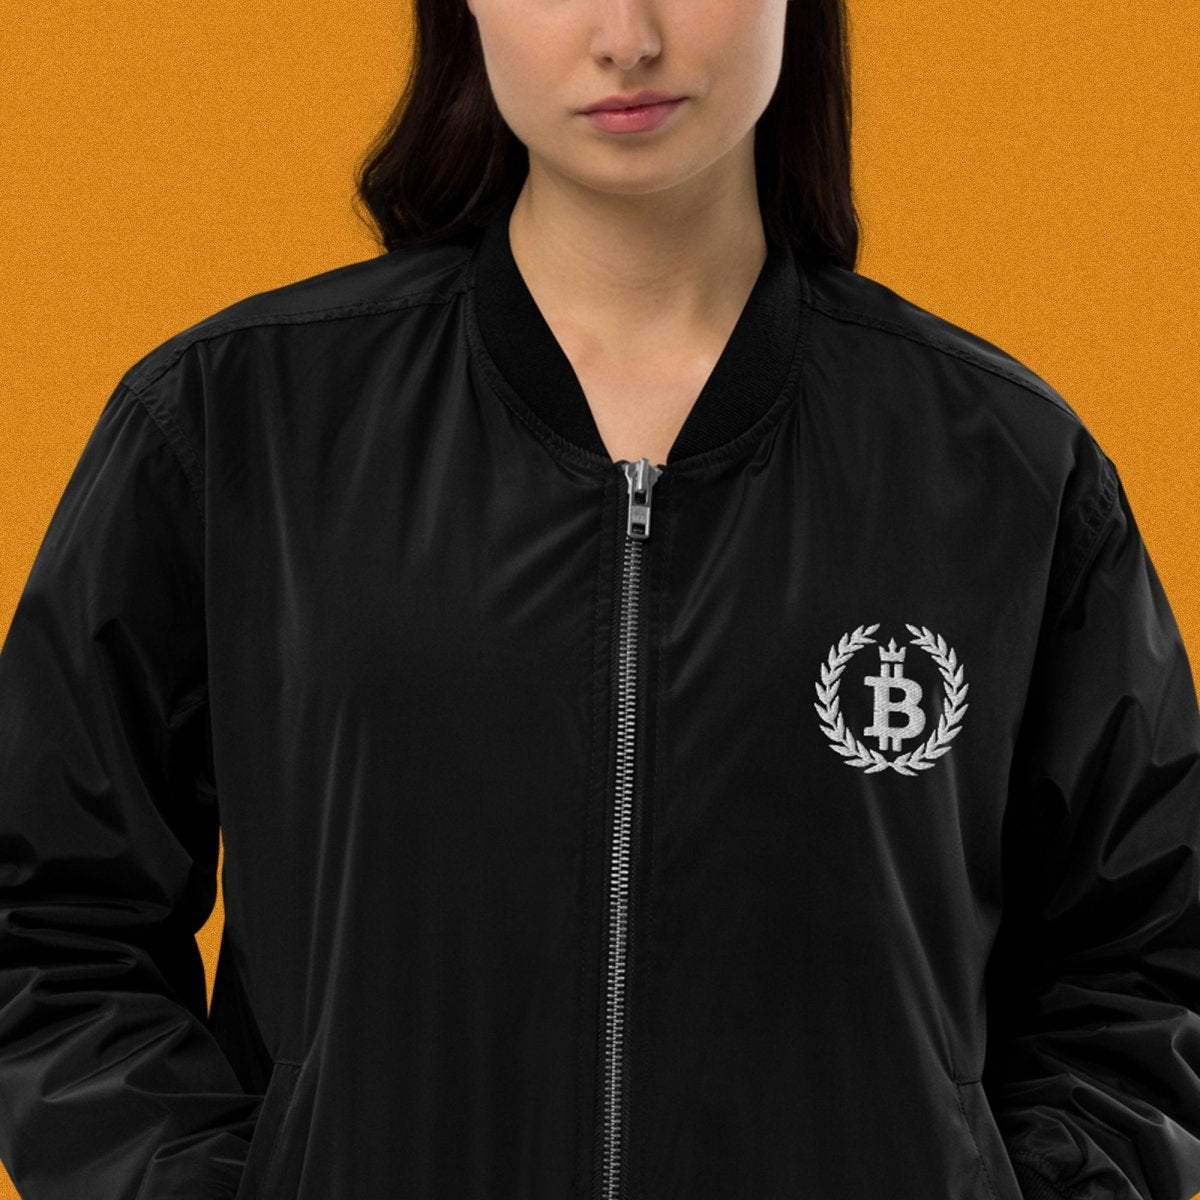 Bitcoin Merch - Bitcoin Dominance Bomber Jacket worn by female model (front view). 